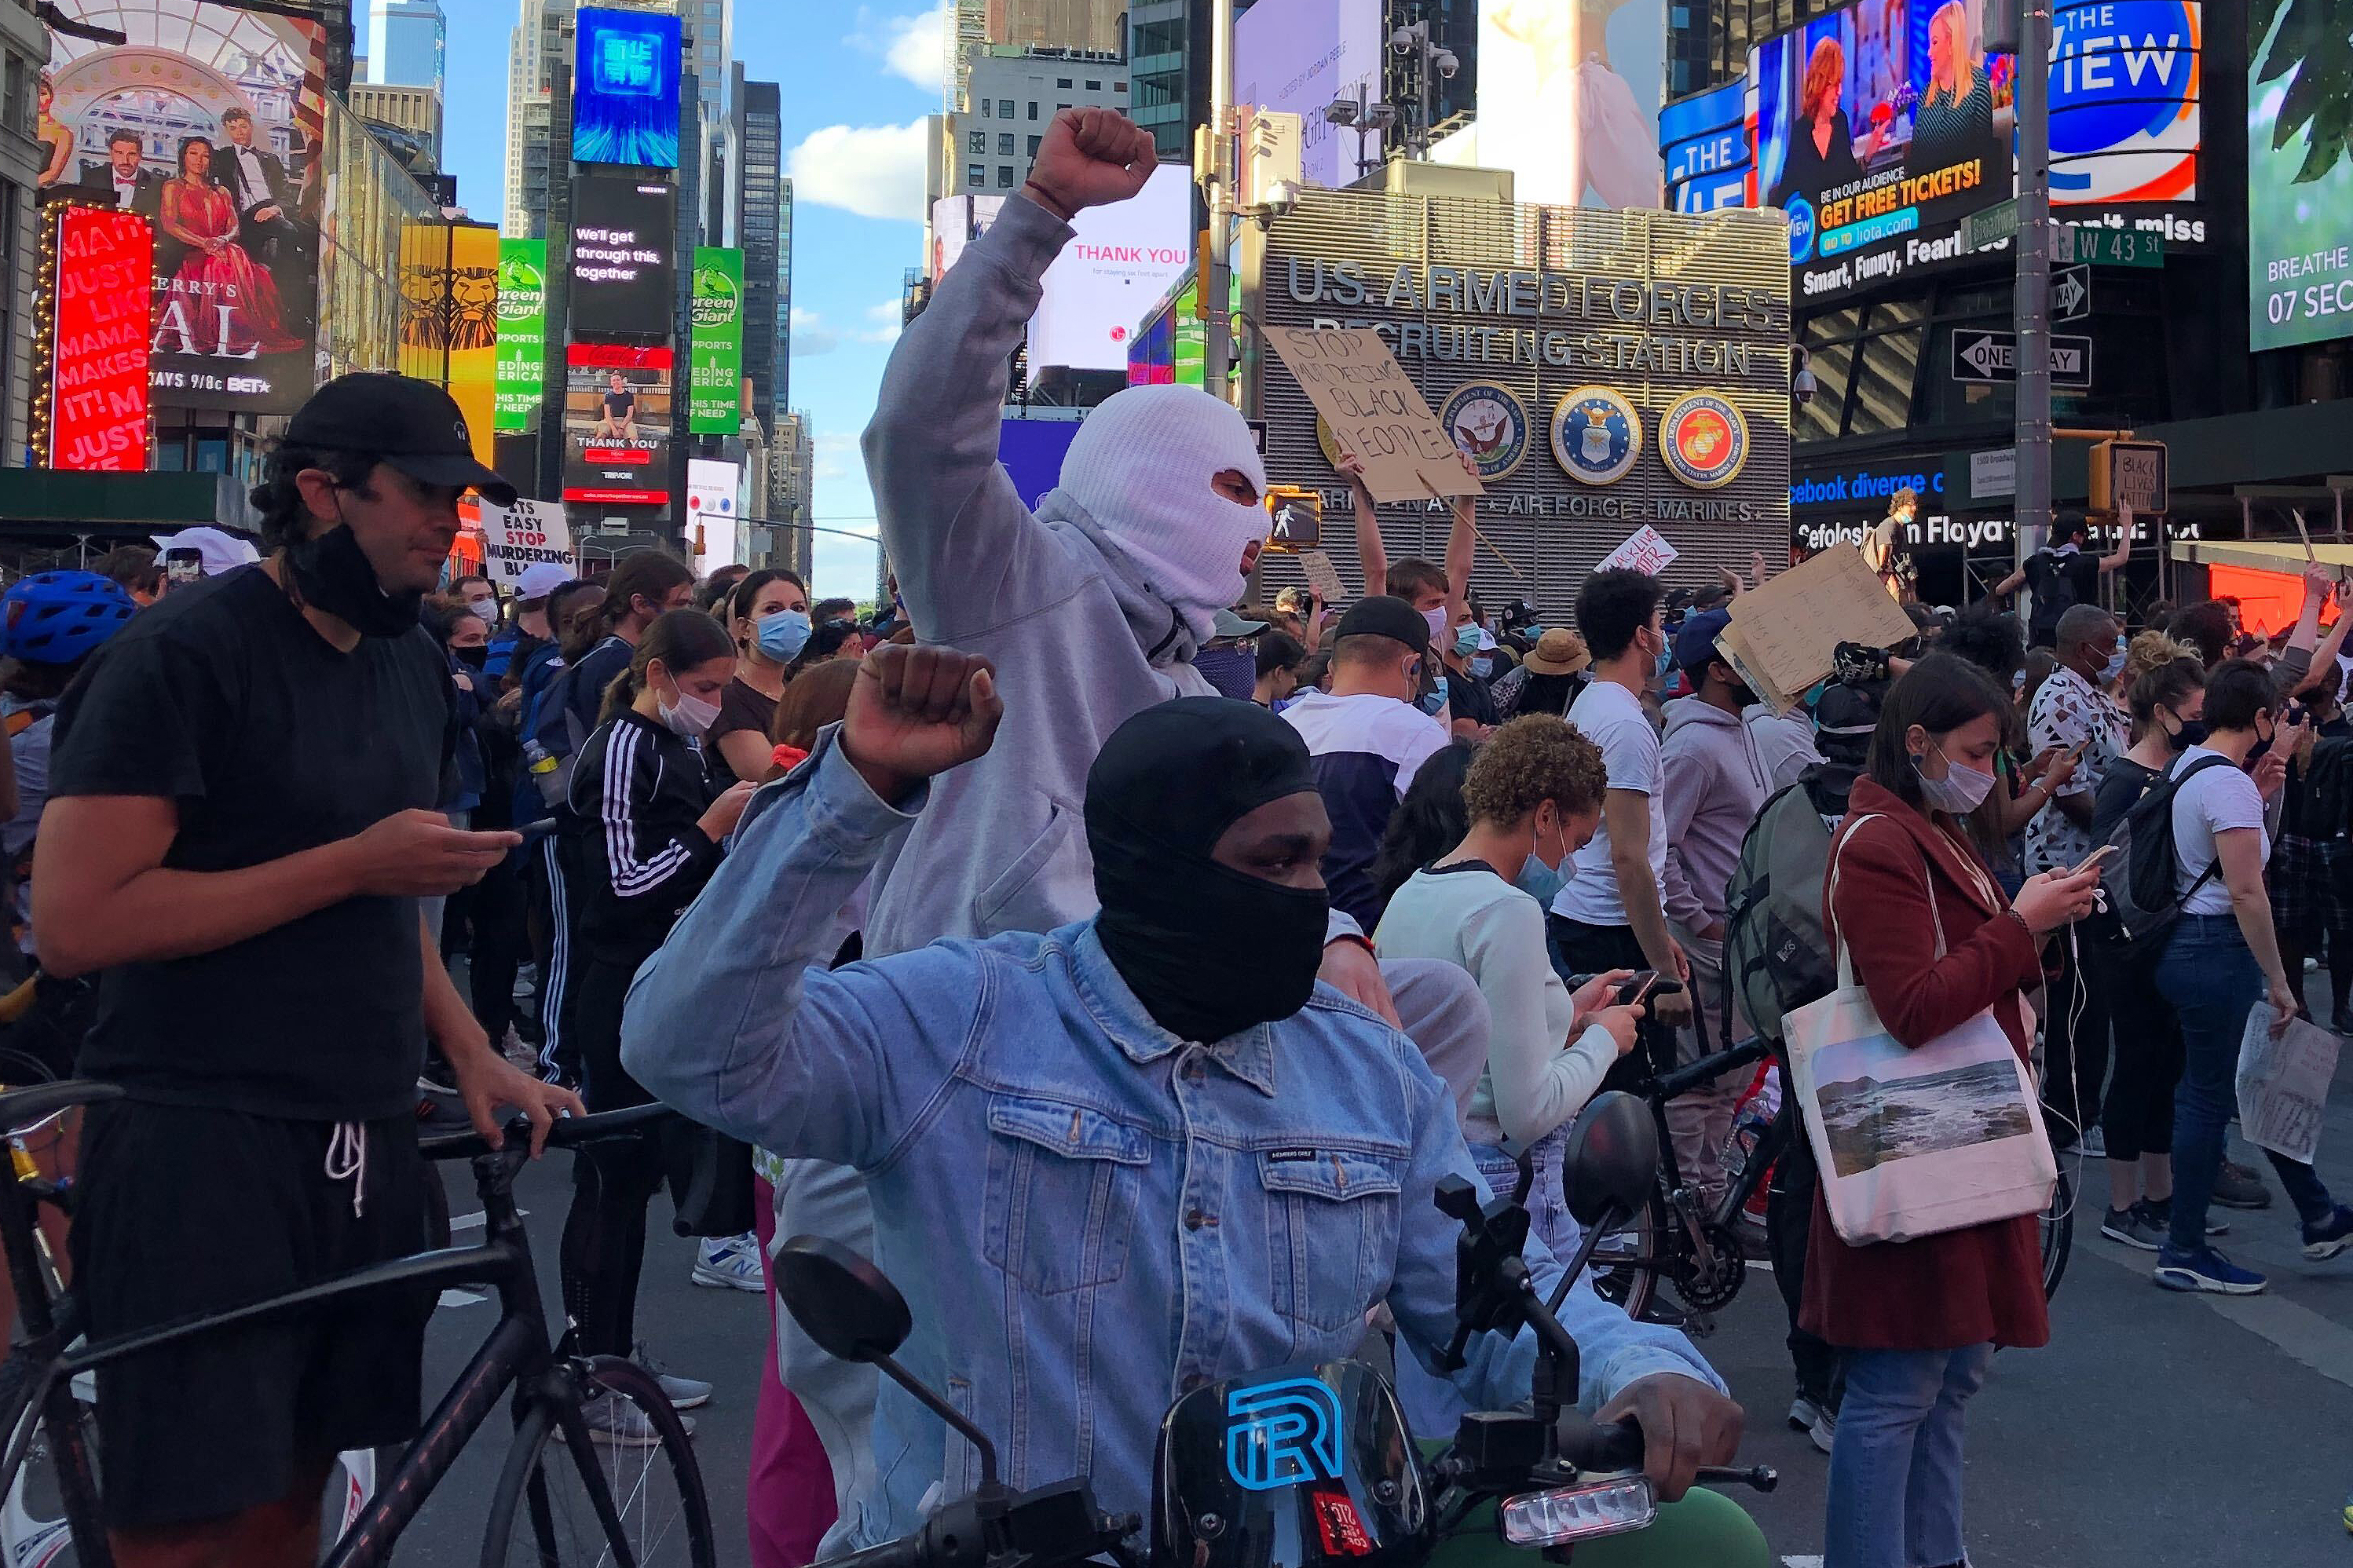 Protesters march through Time Square on May 31, 2020.